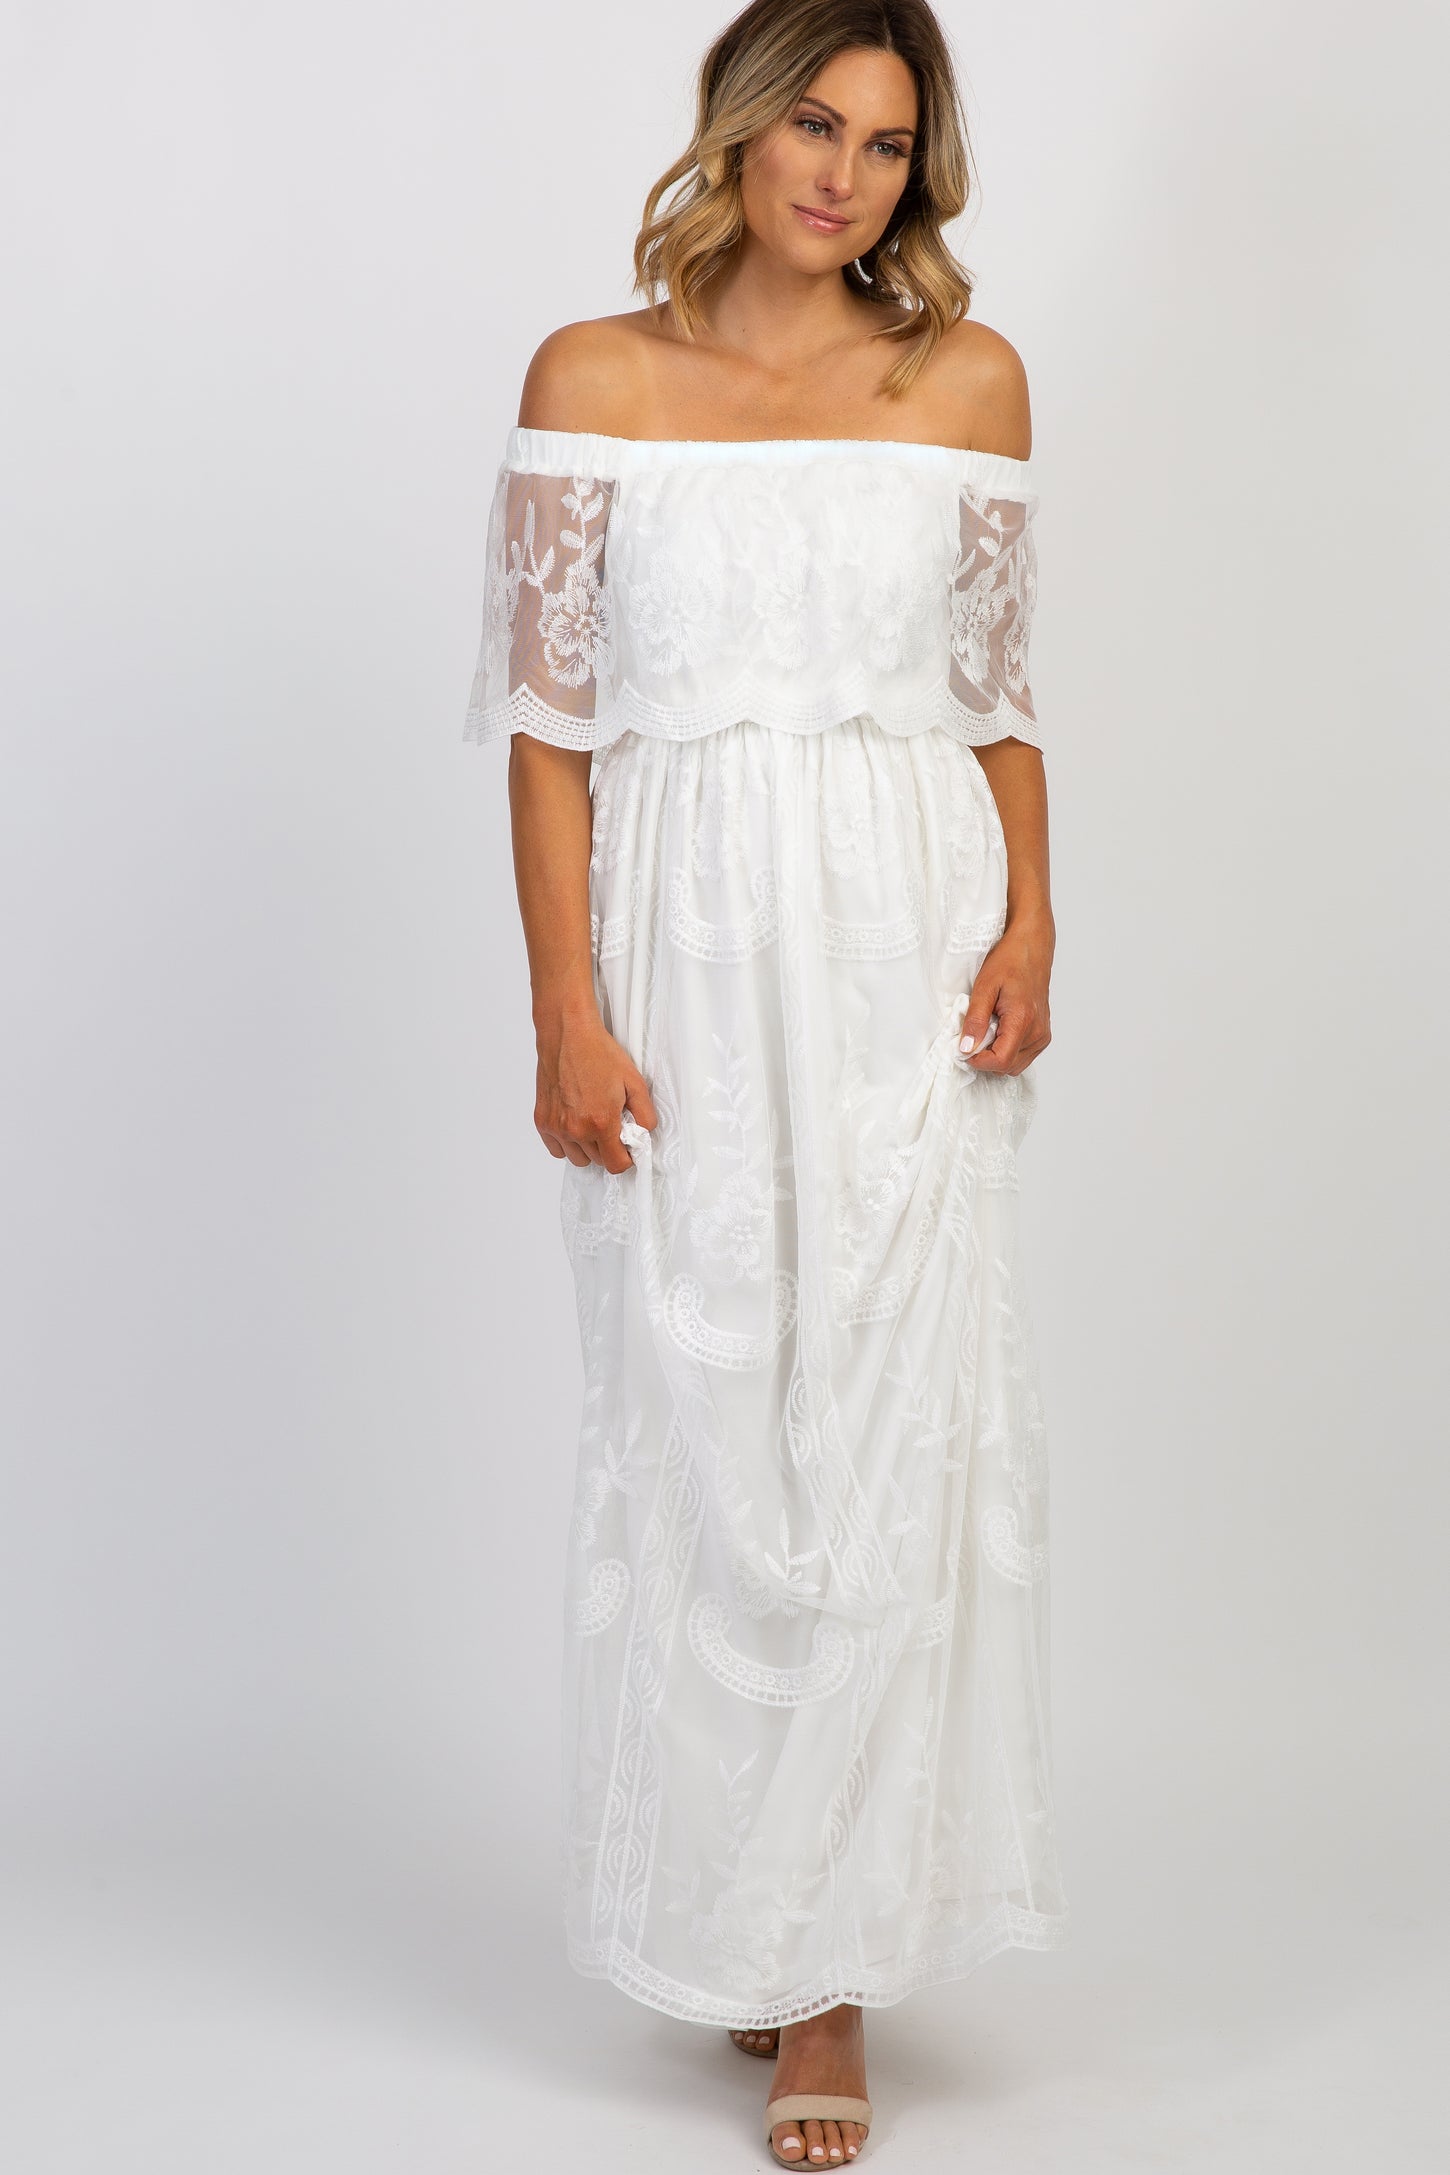 White Lace Mesh Overlay Off Shoulder Maxi Dress